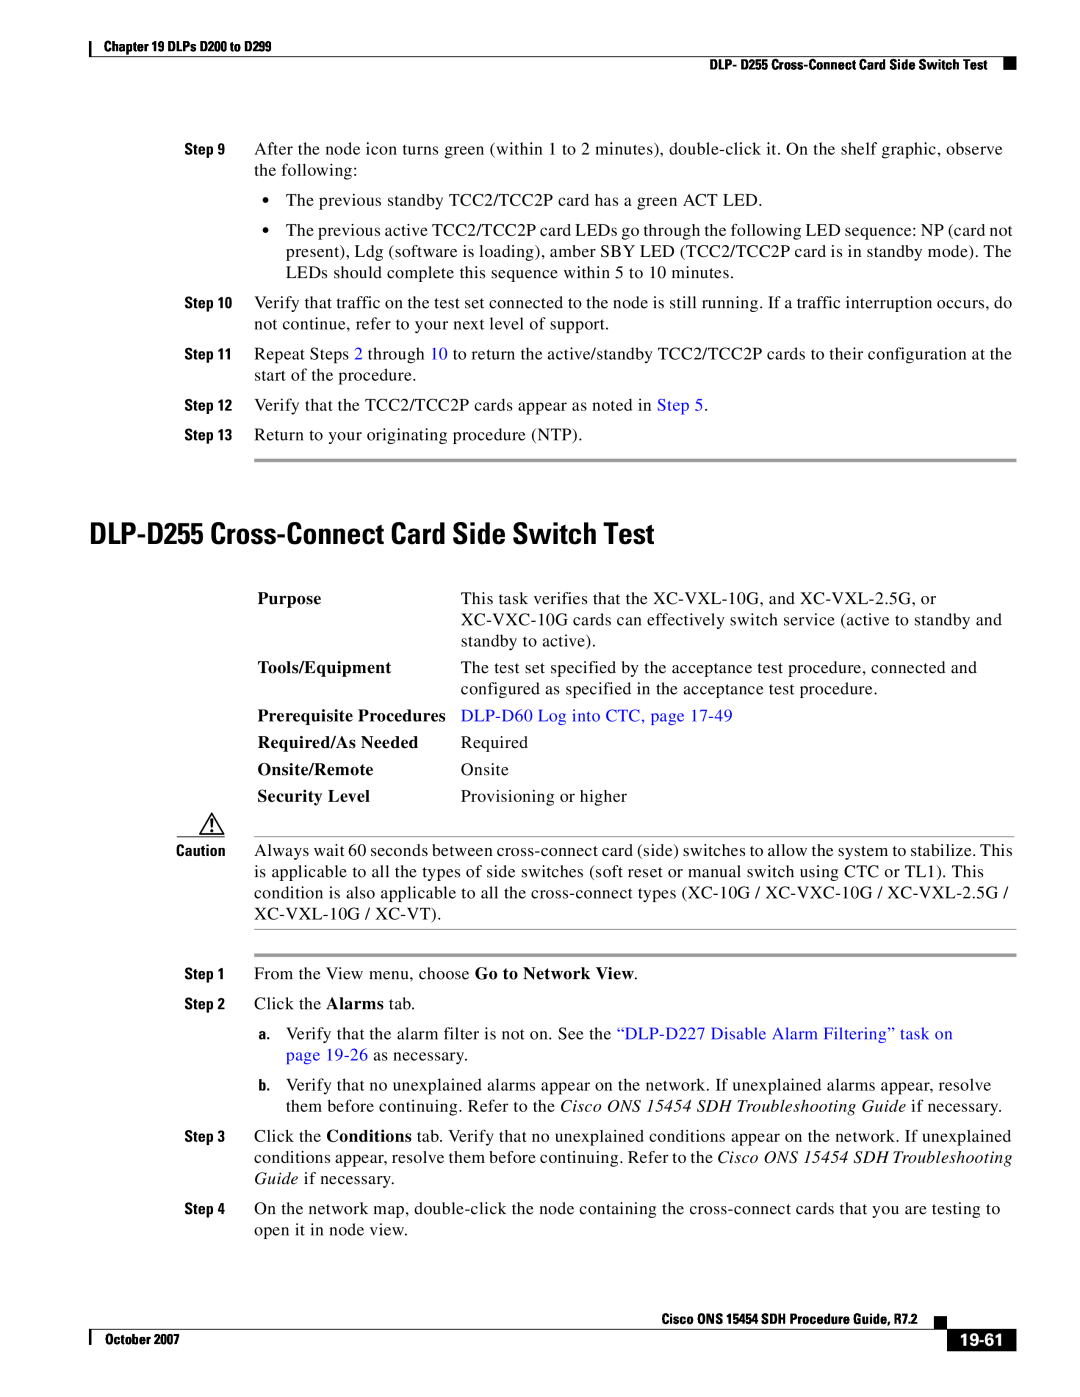 Cisco Systems D200 DLP-D255 Cross-Connect Card Side Switch Test, 19-61, Purpose, Tools/Equipment, Prerequisite Procedures 